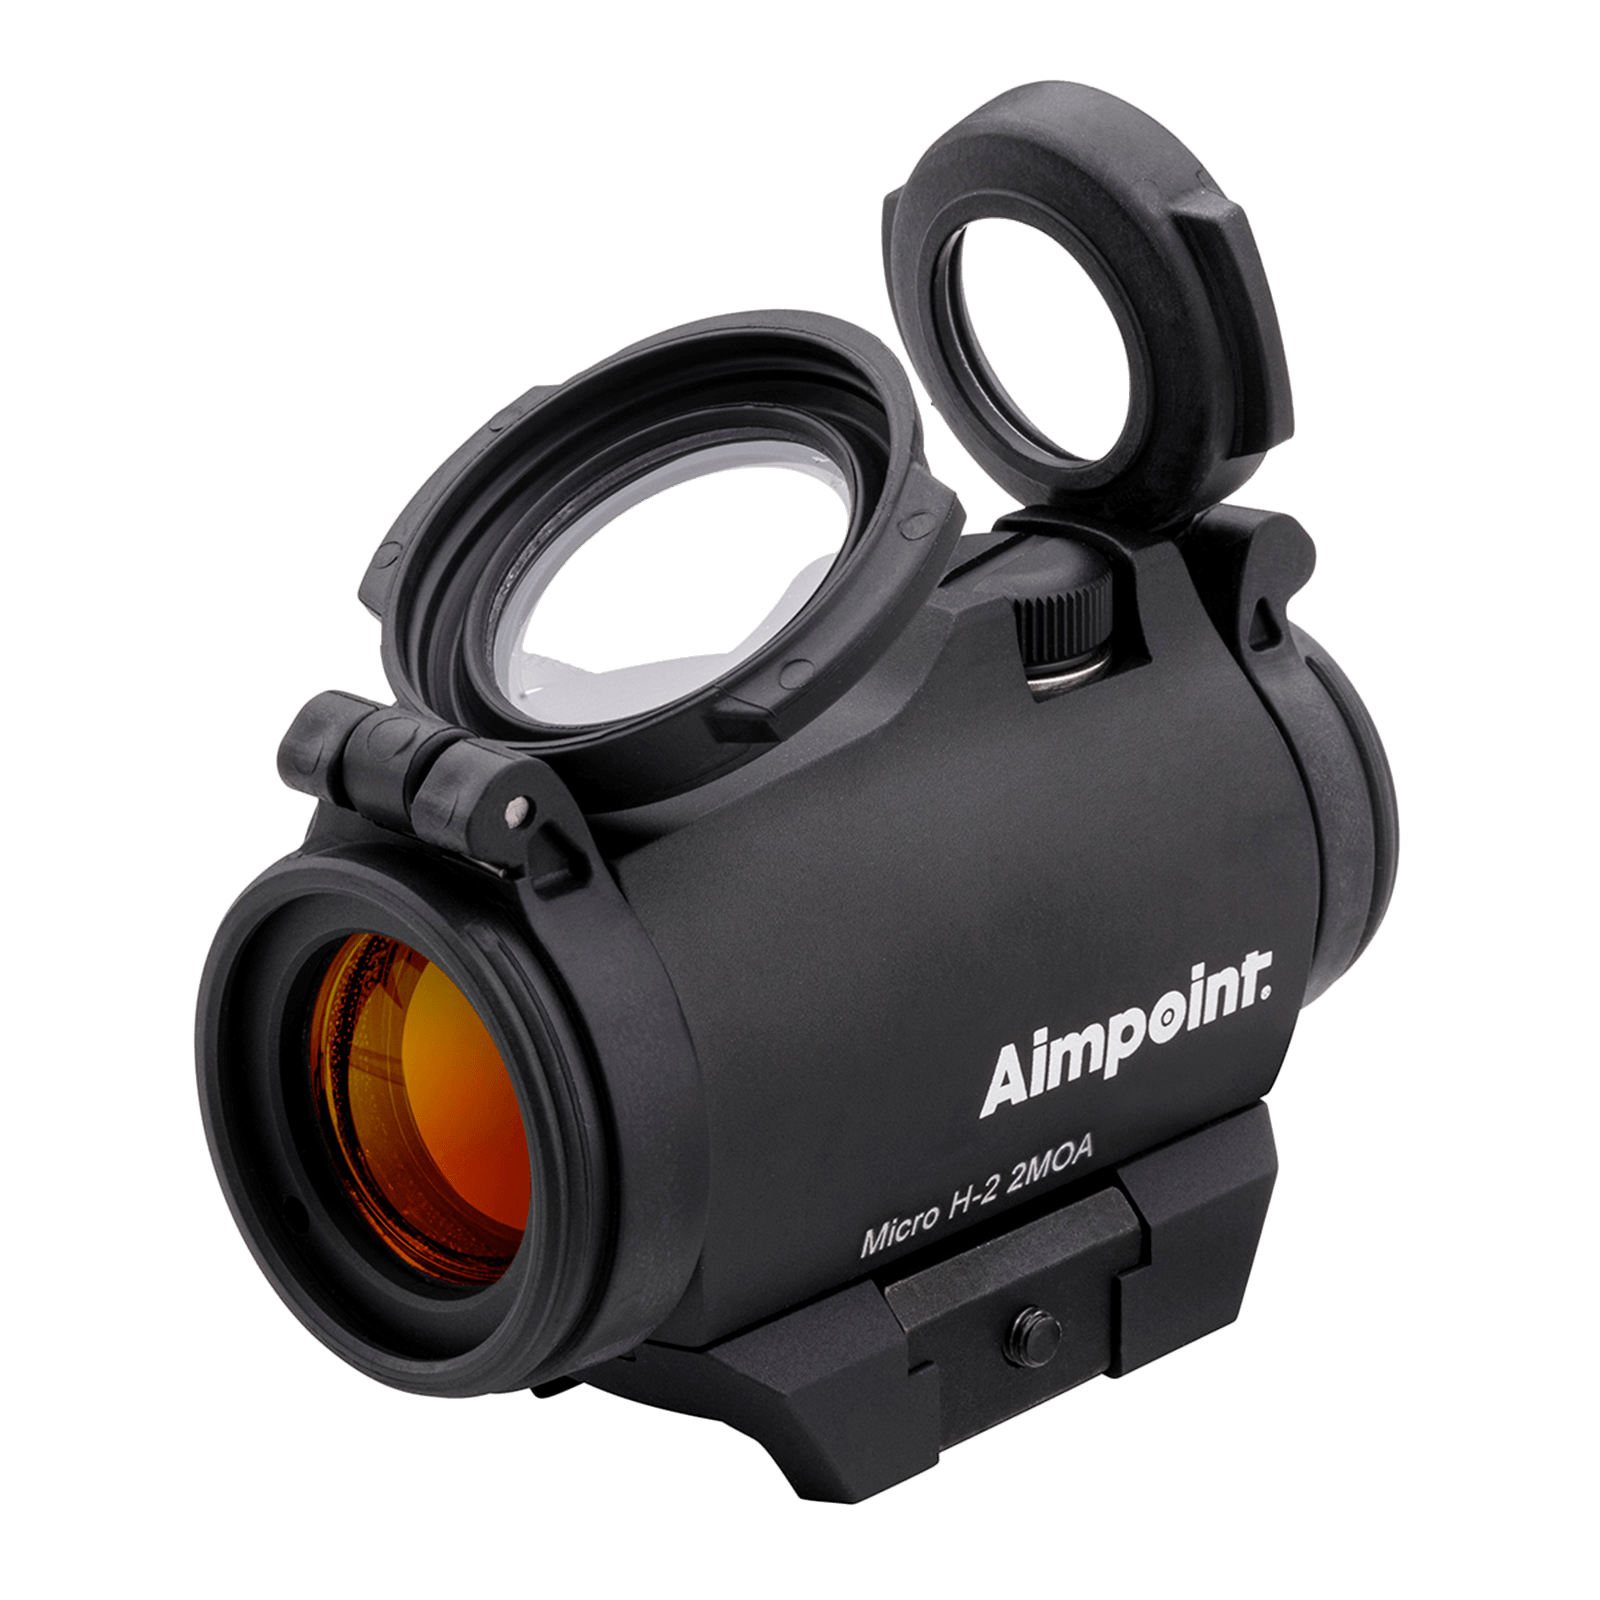 Aimpoint Micro H-2 Red dot sight 2 MOA